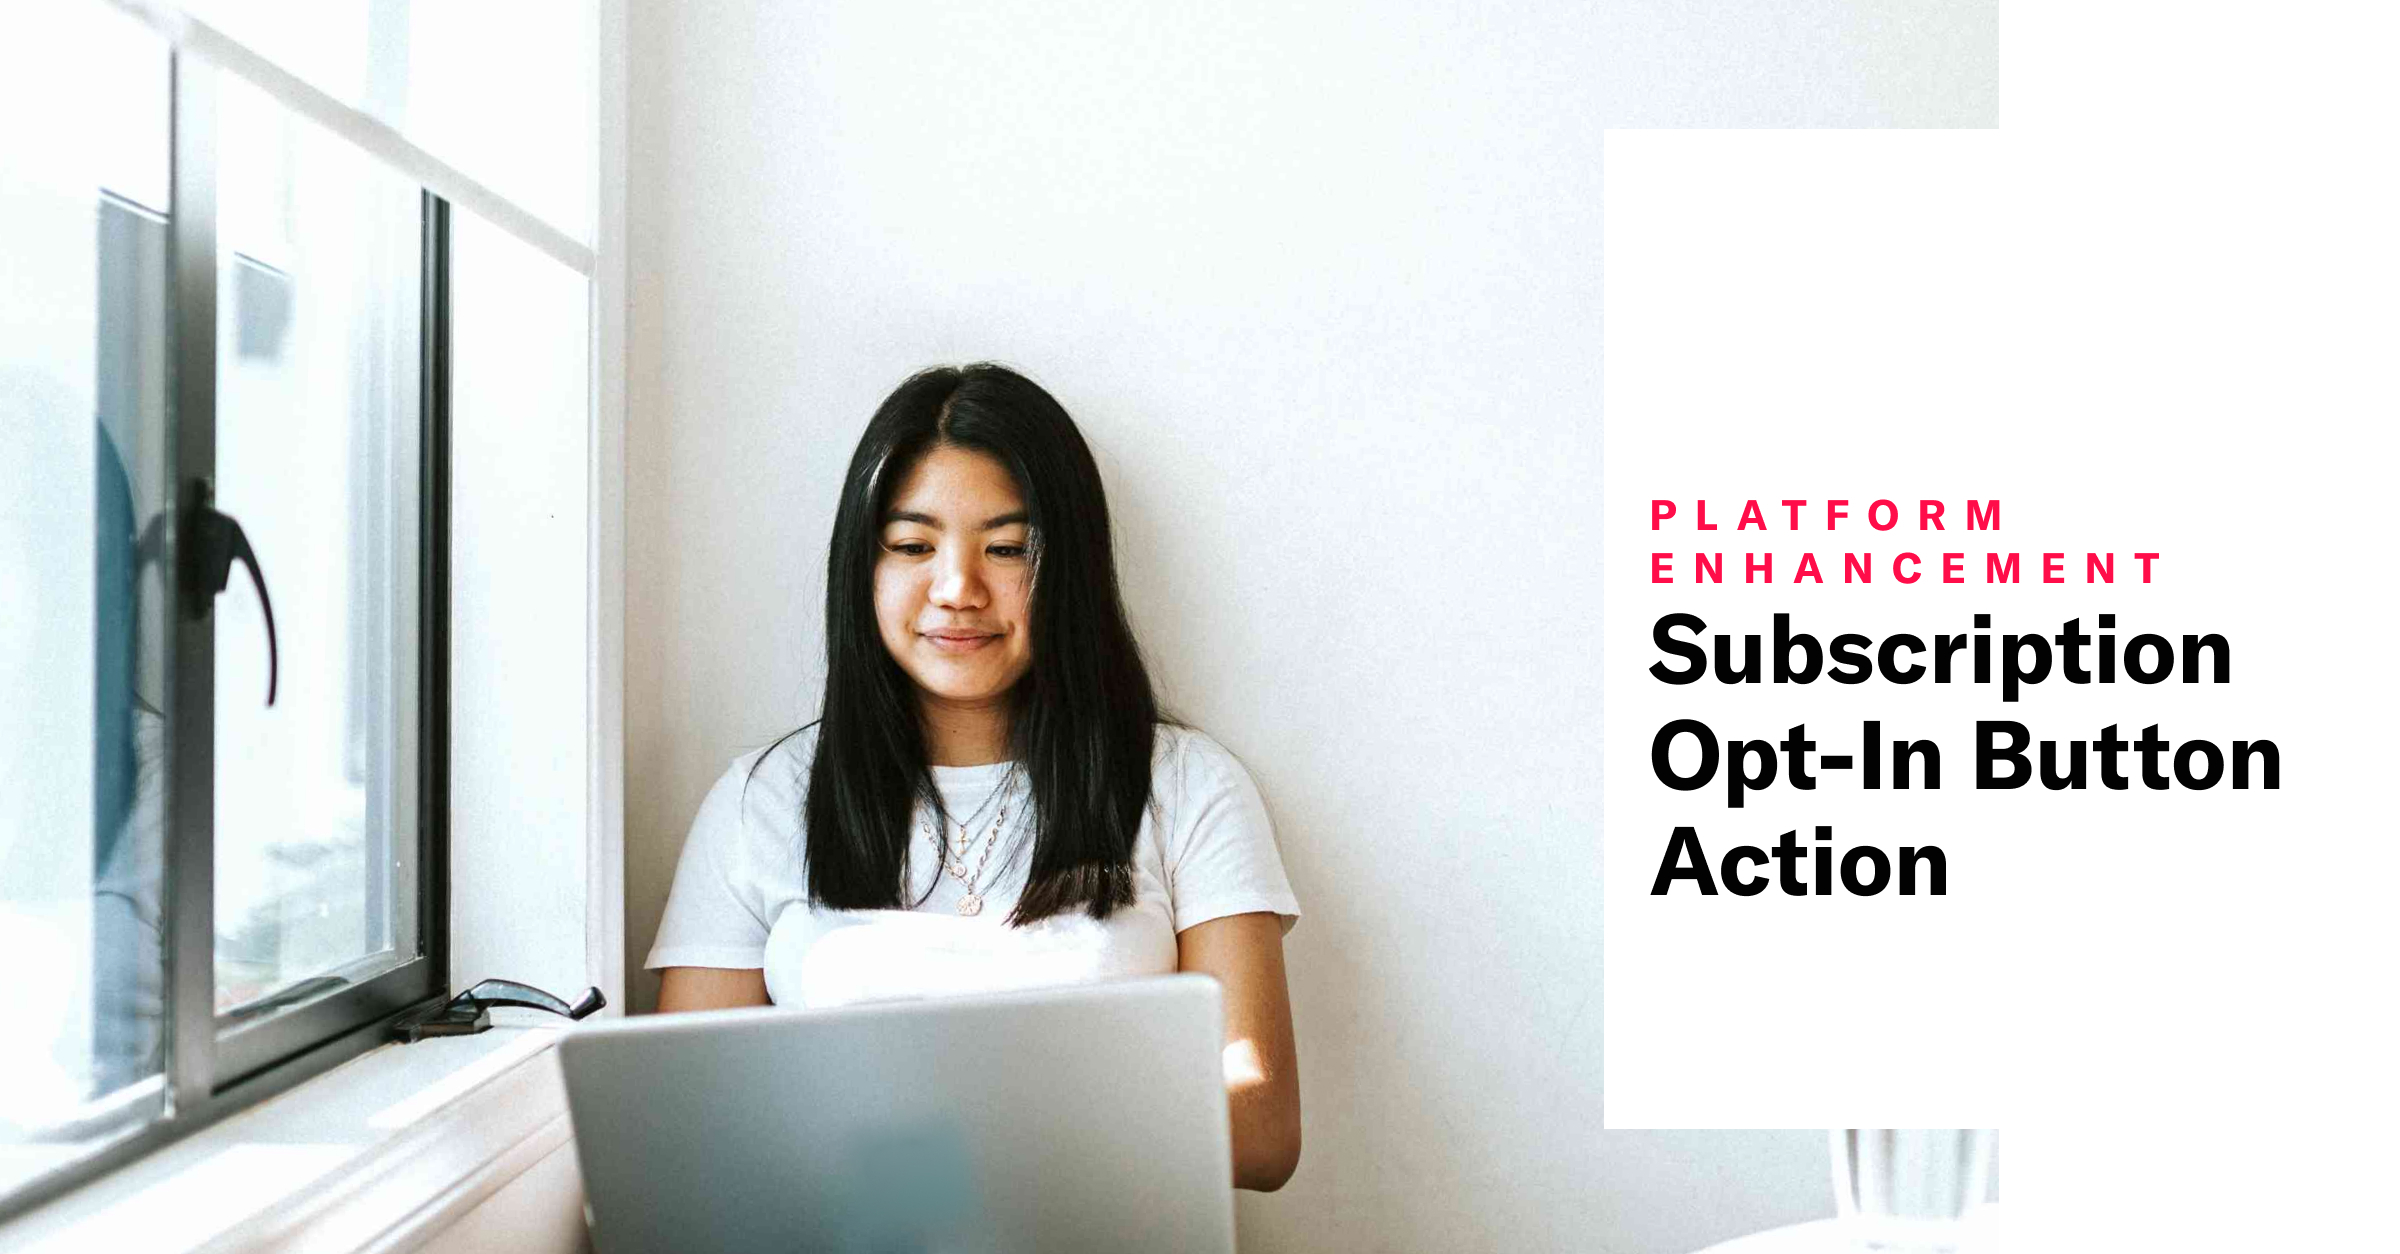 Subscription Opt-In Button Action